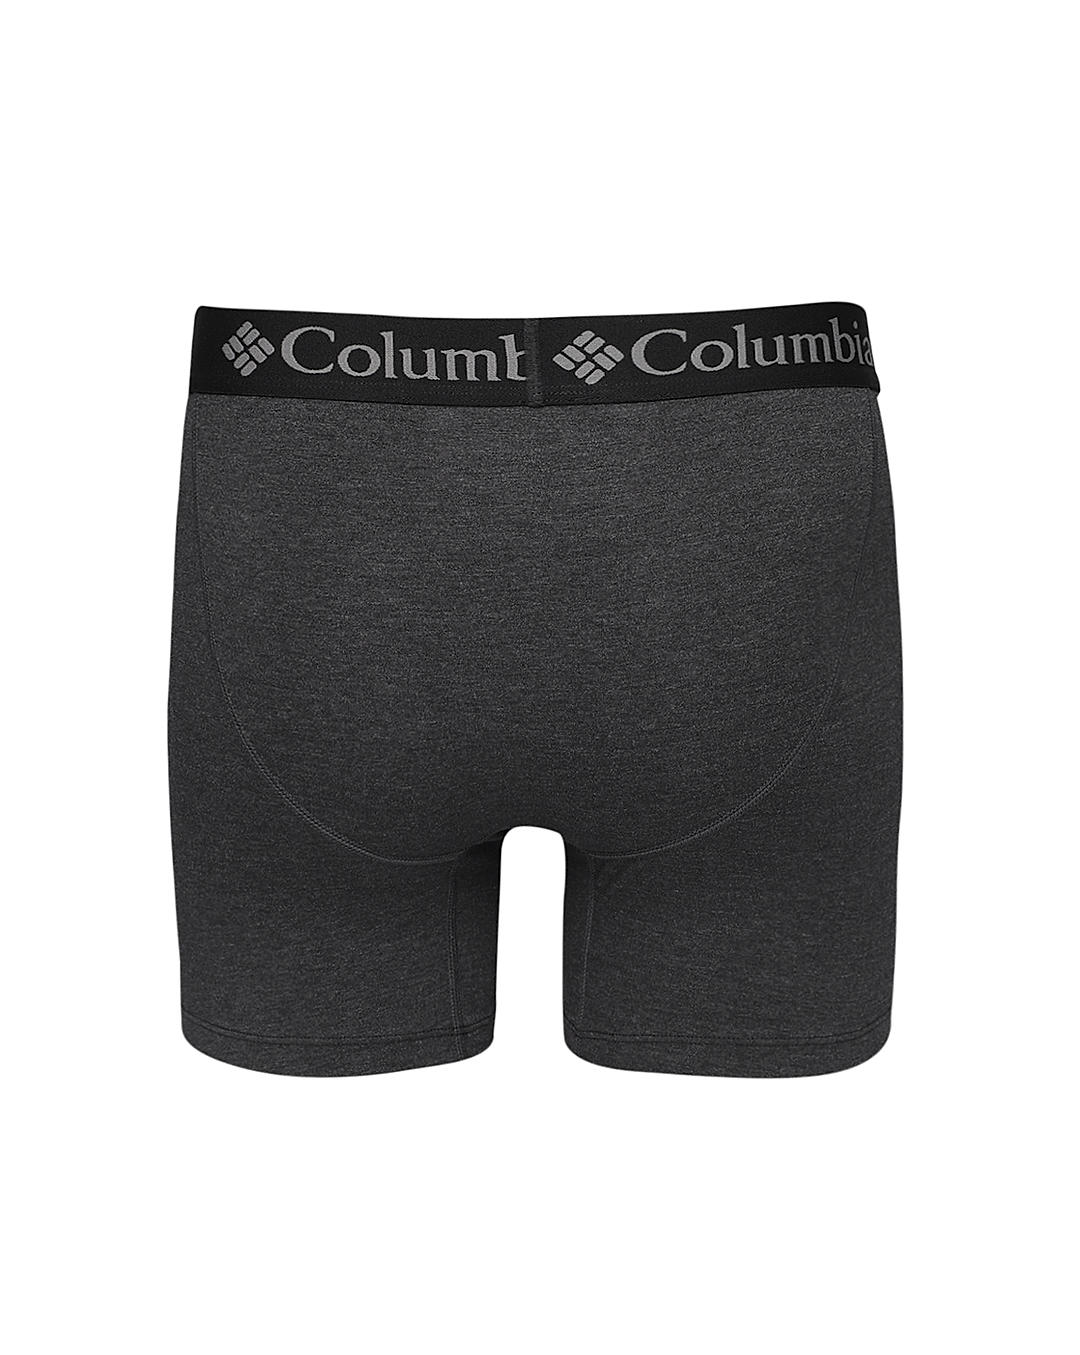 Buy Columbia Men Performance Cotton / Stretch Solid Boxer Brief